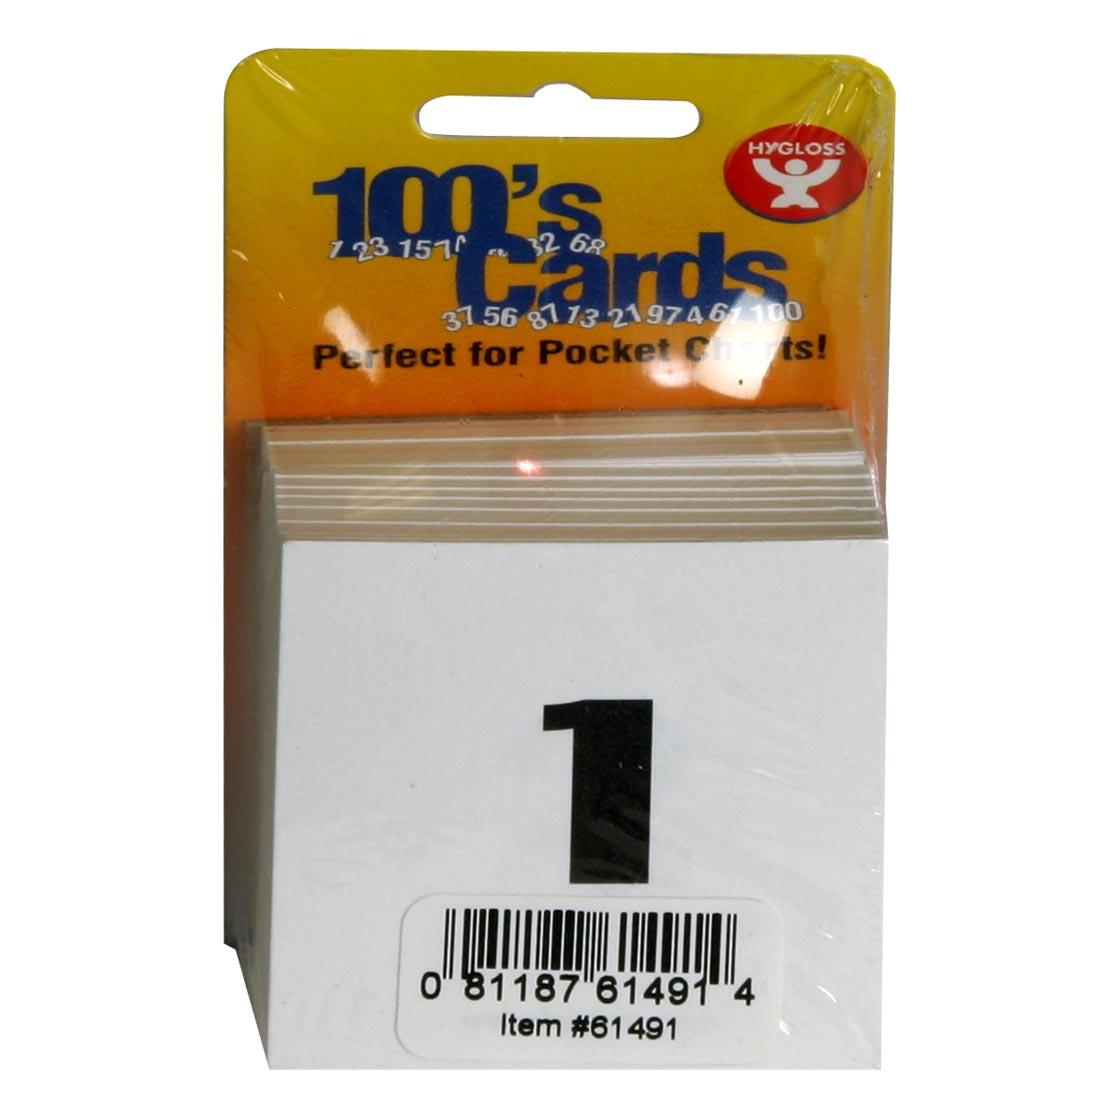 Numbered 100s Cards for Pocket Charts